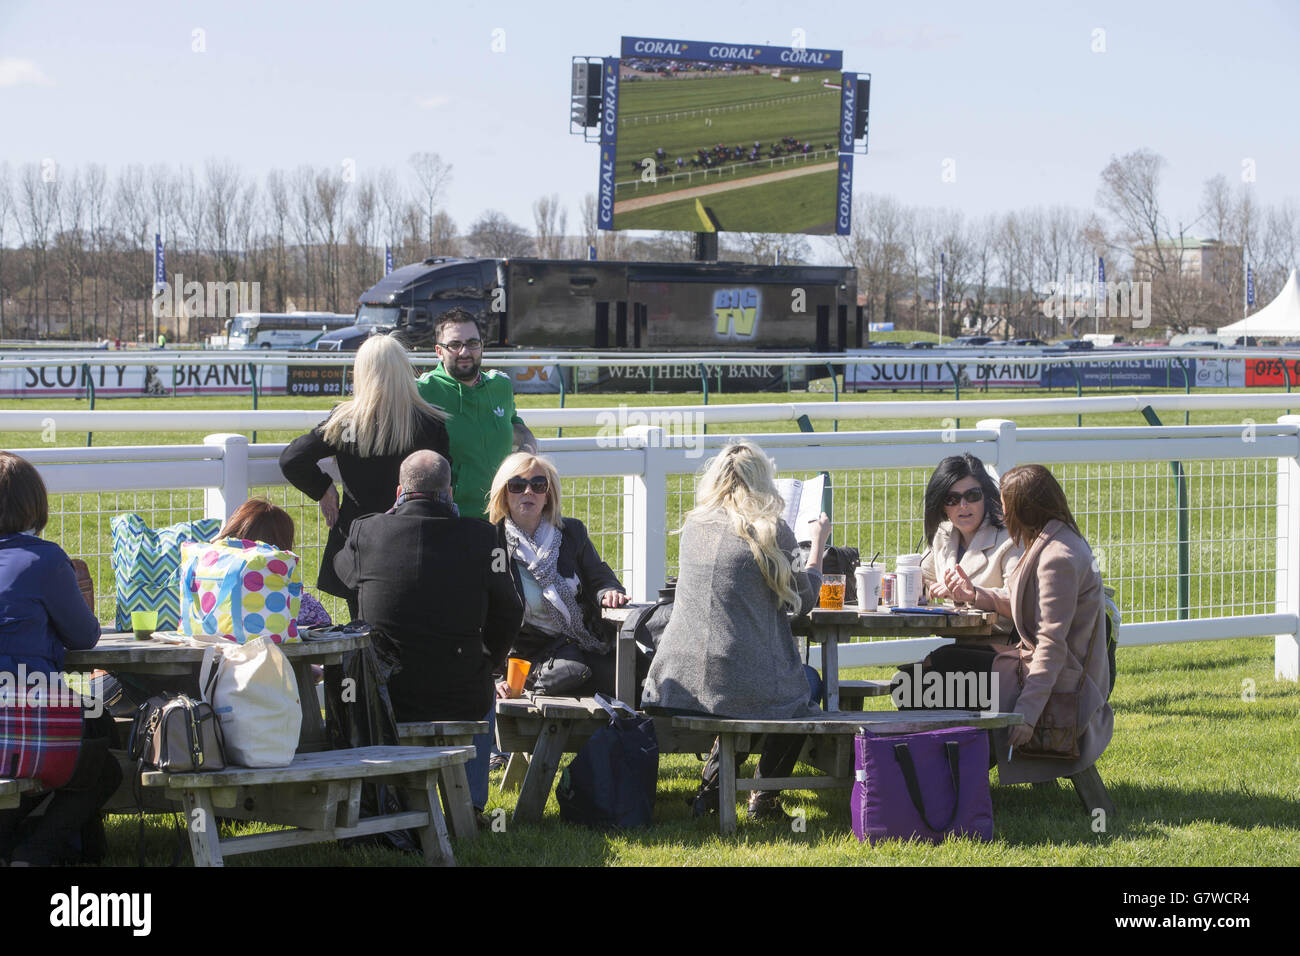 Horse Racing - 2015 Coral Scottish Grand National Festival - Day Two - Ayr Racecourse Stock Photo